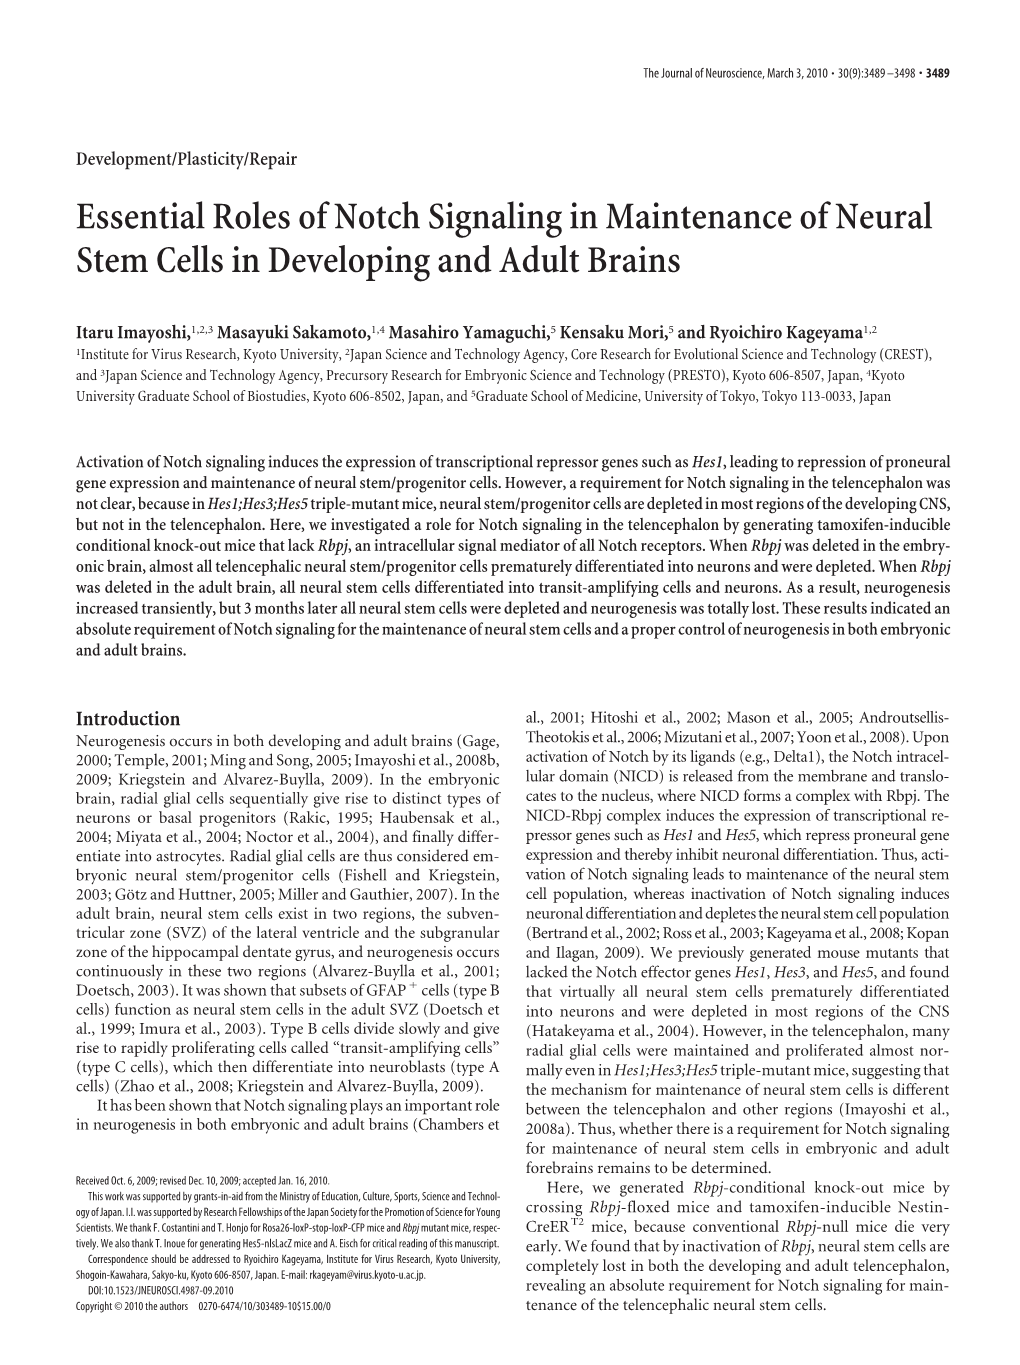 Essential Roles of Notch Signaling in Maintenance of Neural Stem Cells in Developing and Adult Brains